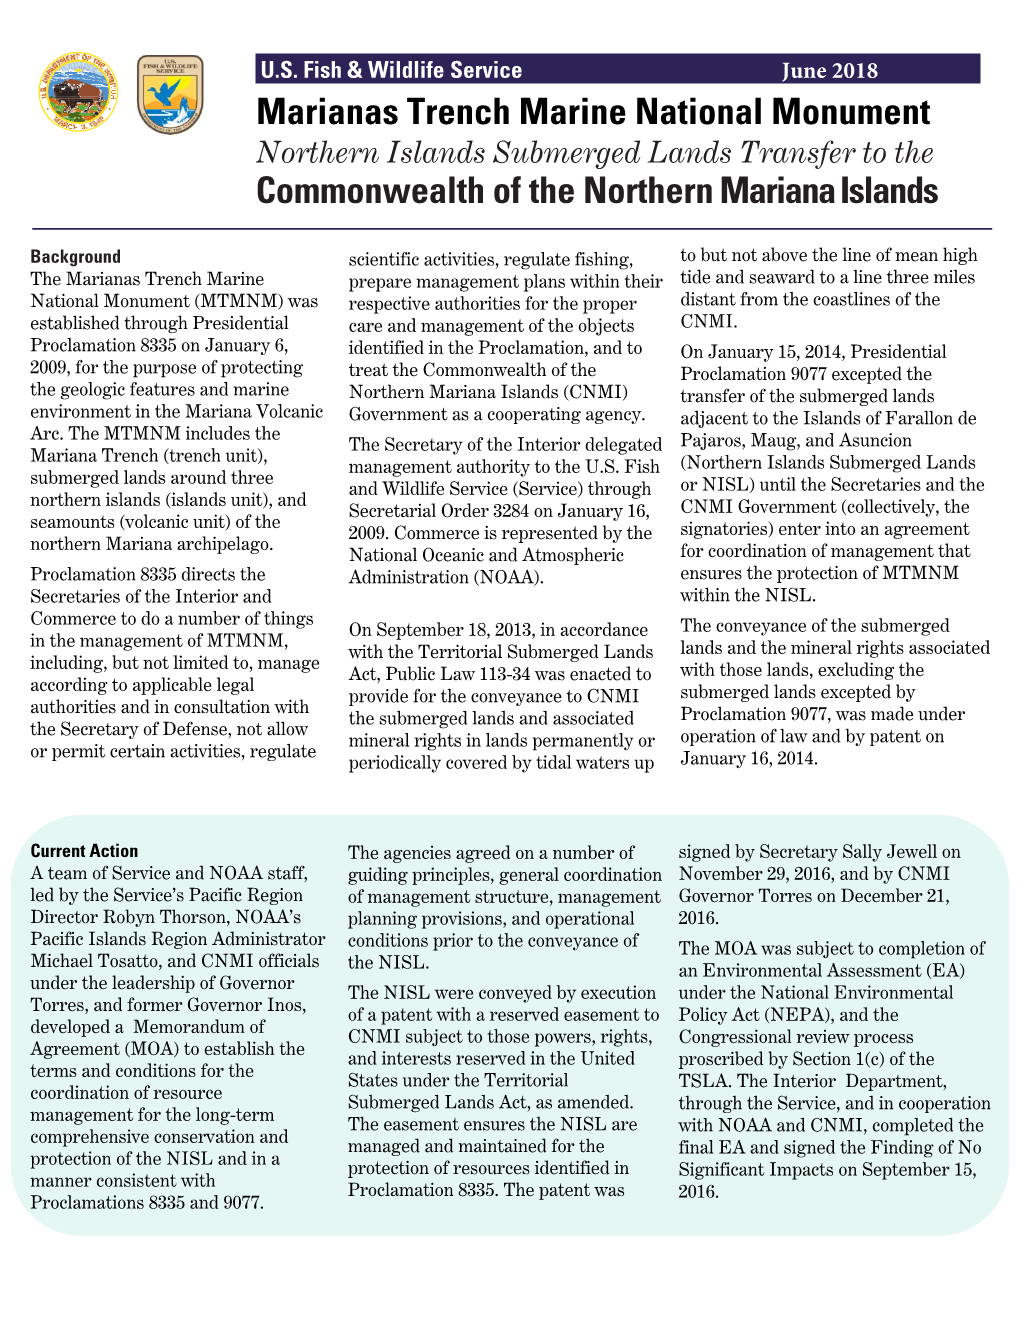 Marianas Trench Marine National Monument Commonwealth of The